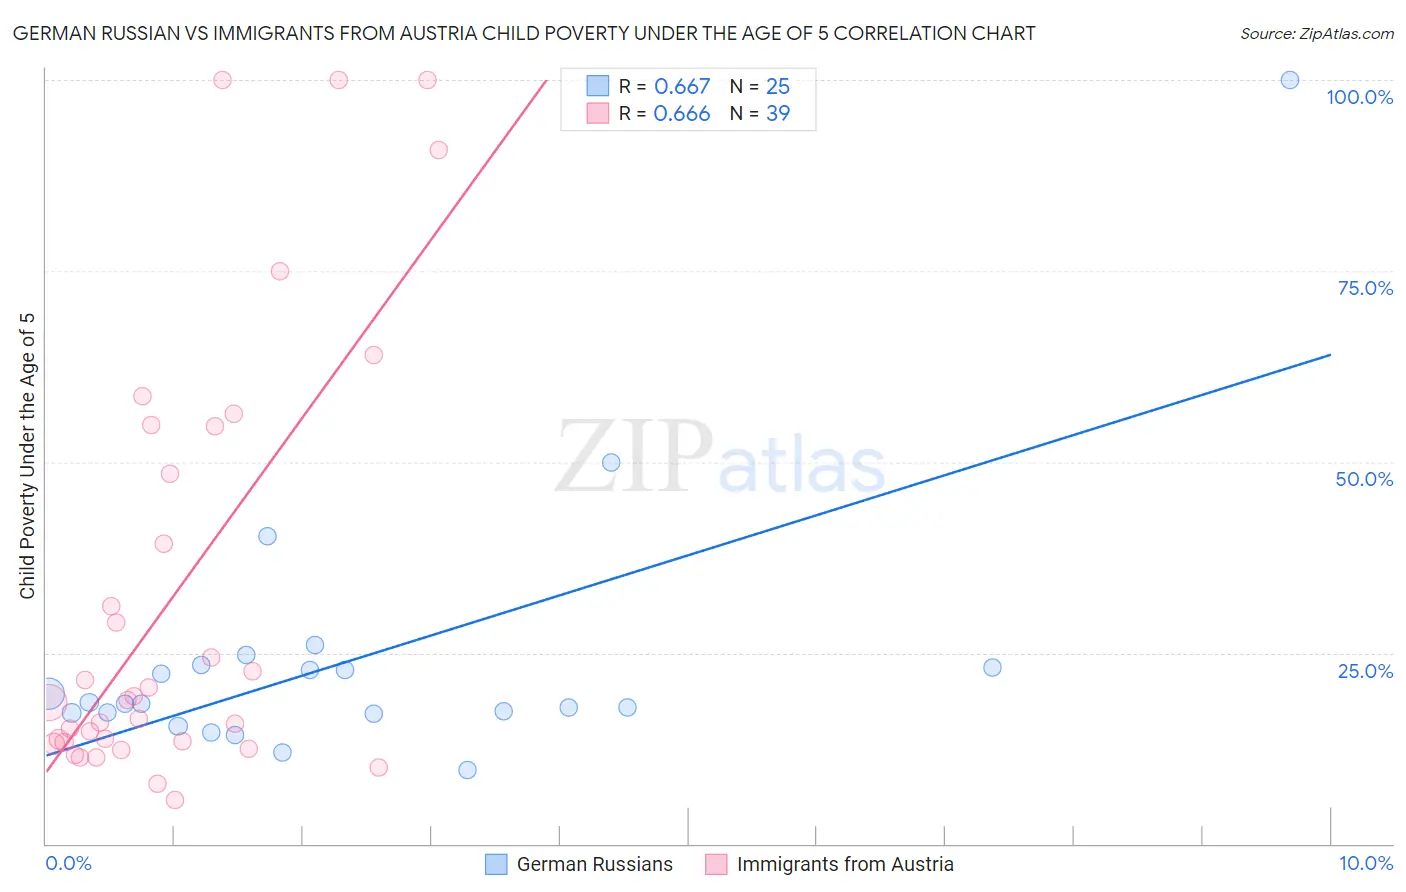 German Russian vs Immigrants from Austria Child Poverty Under the Age of 5